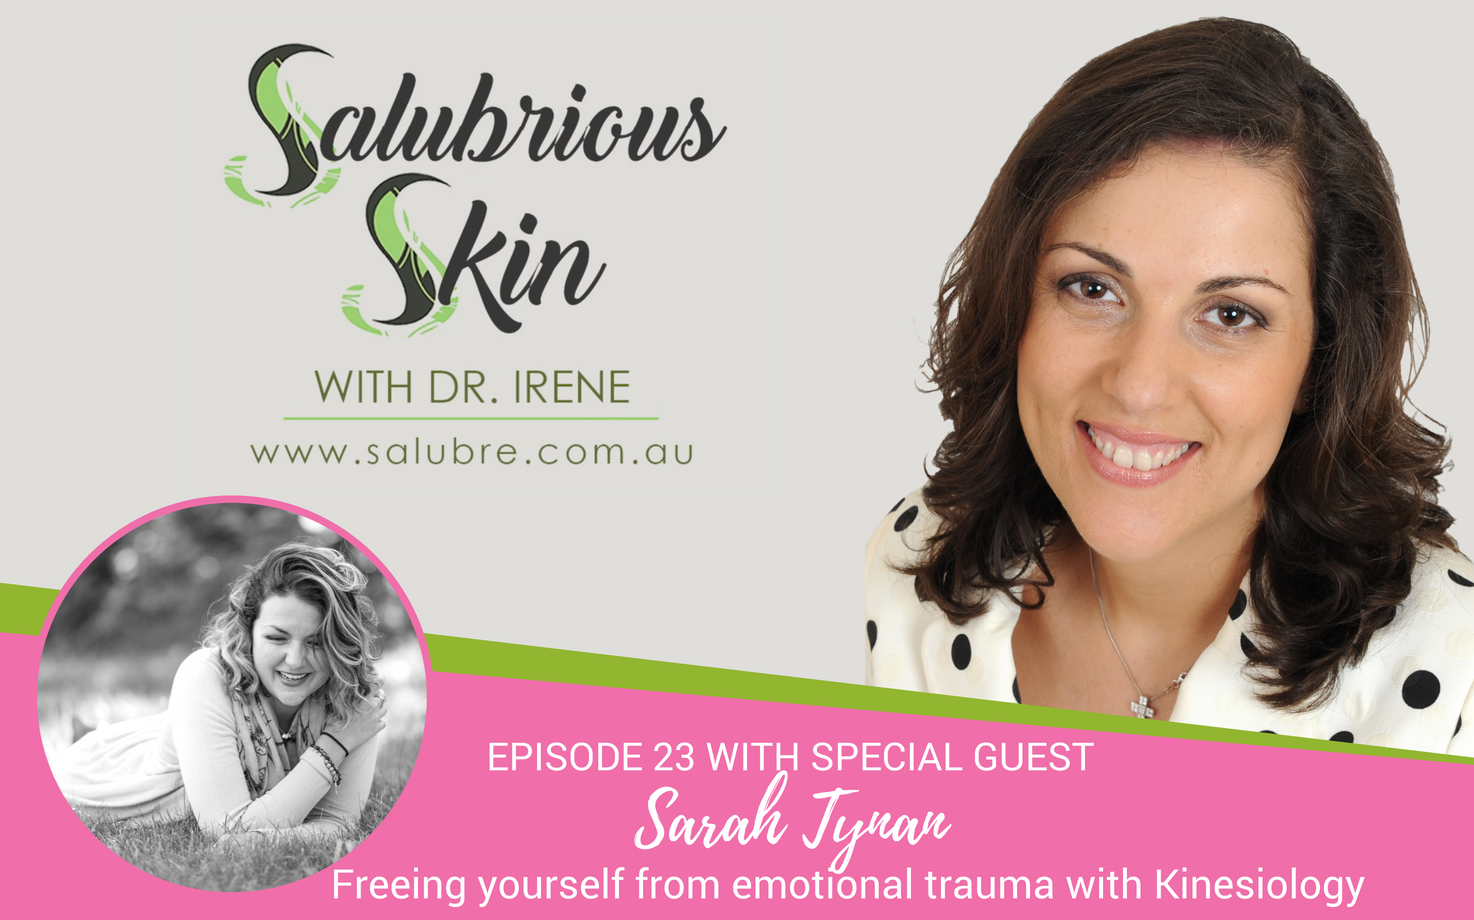 Episode 23: Freeing yourself from emotional trauma with Kinesiology